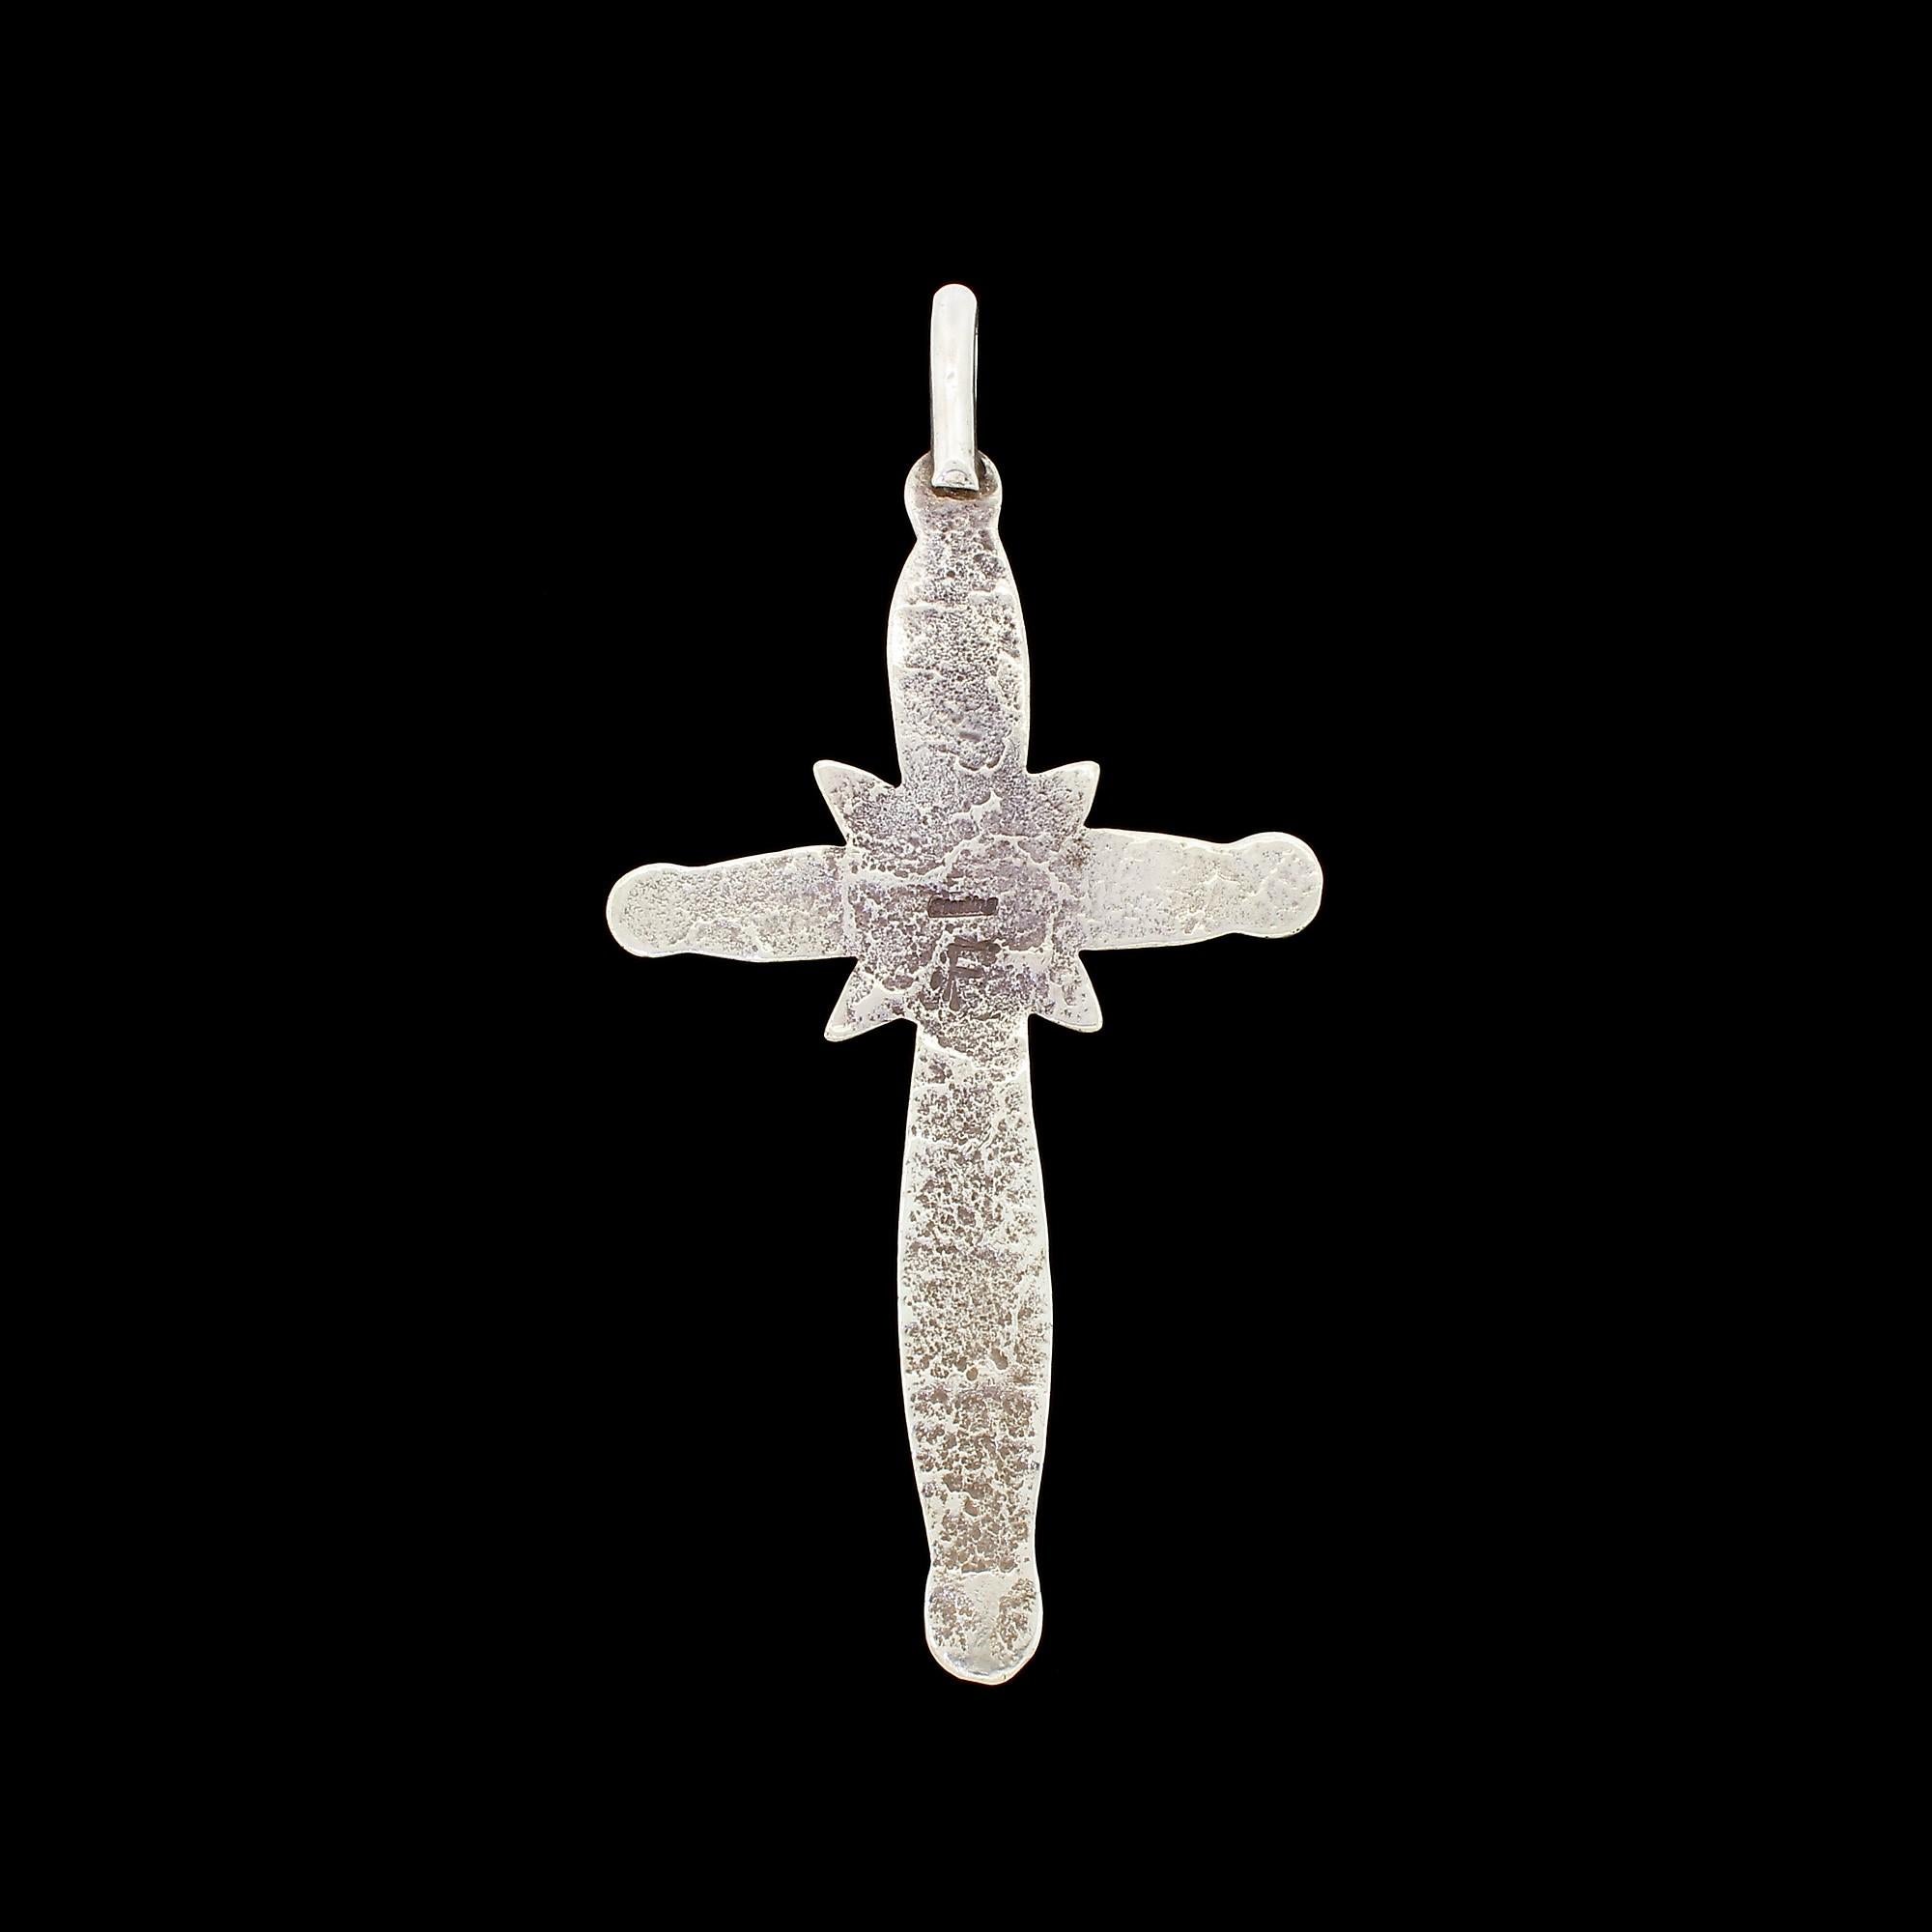 Outstanding and large early Navajo Indian sandcast cross pendant from the estate of a collector of unusual Native American silver. The front contains warm natural patina, and is smooth to the touch from years of handling and good construction. The